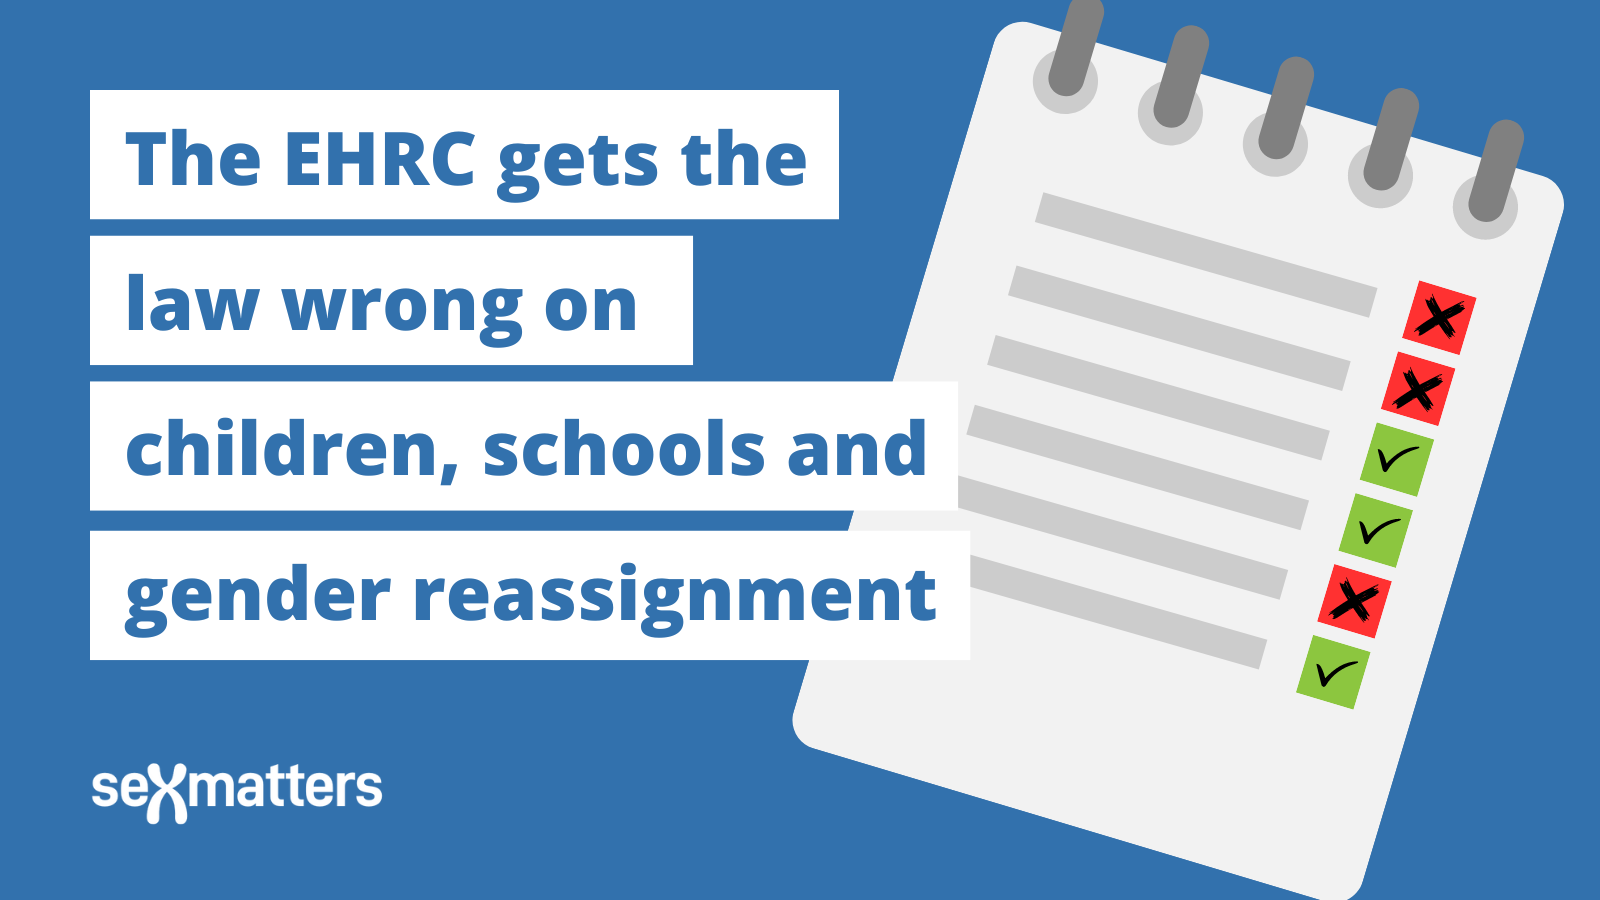 The EHRC gets the law wrong on children, schools and gender reassignment